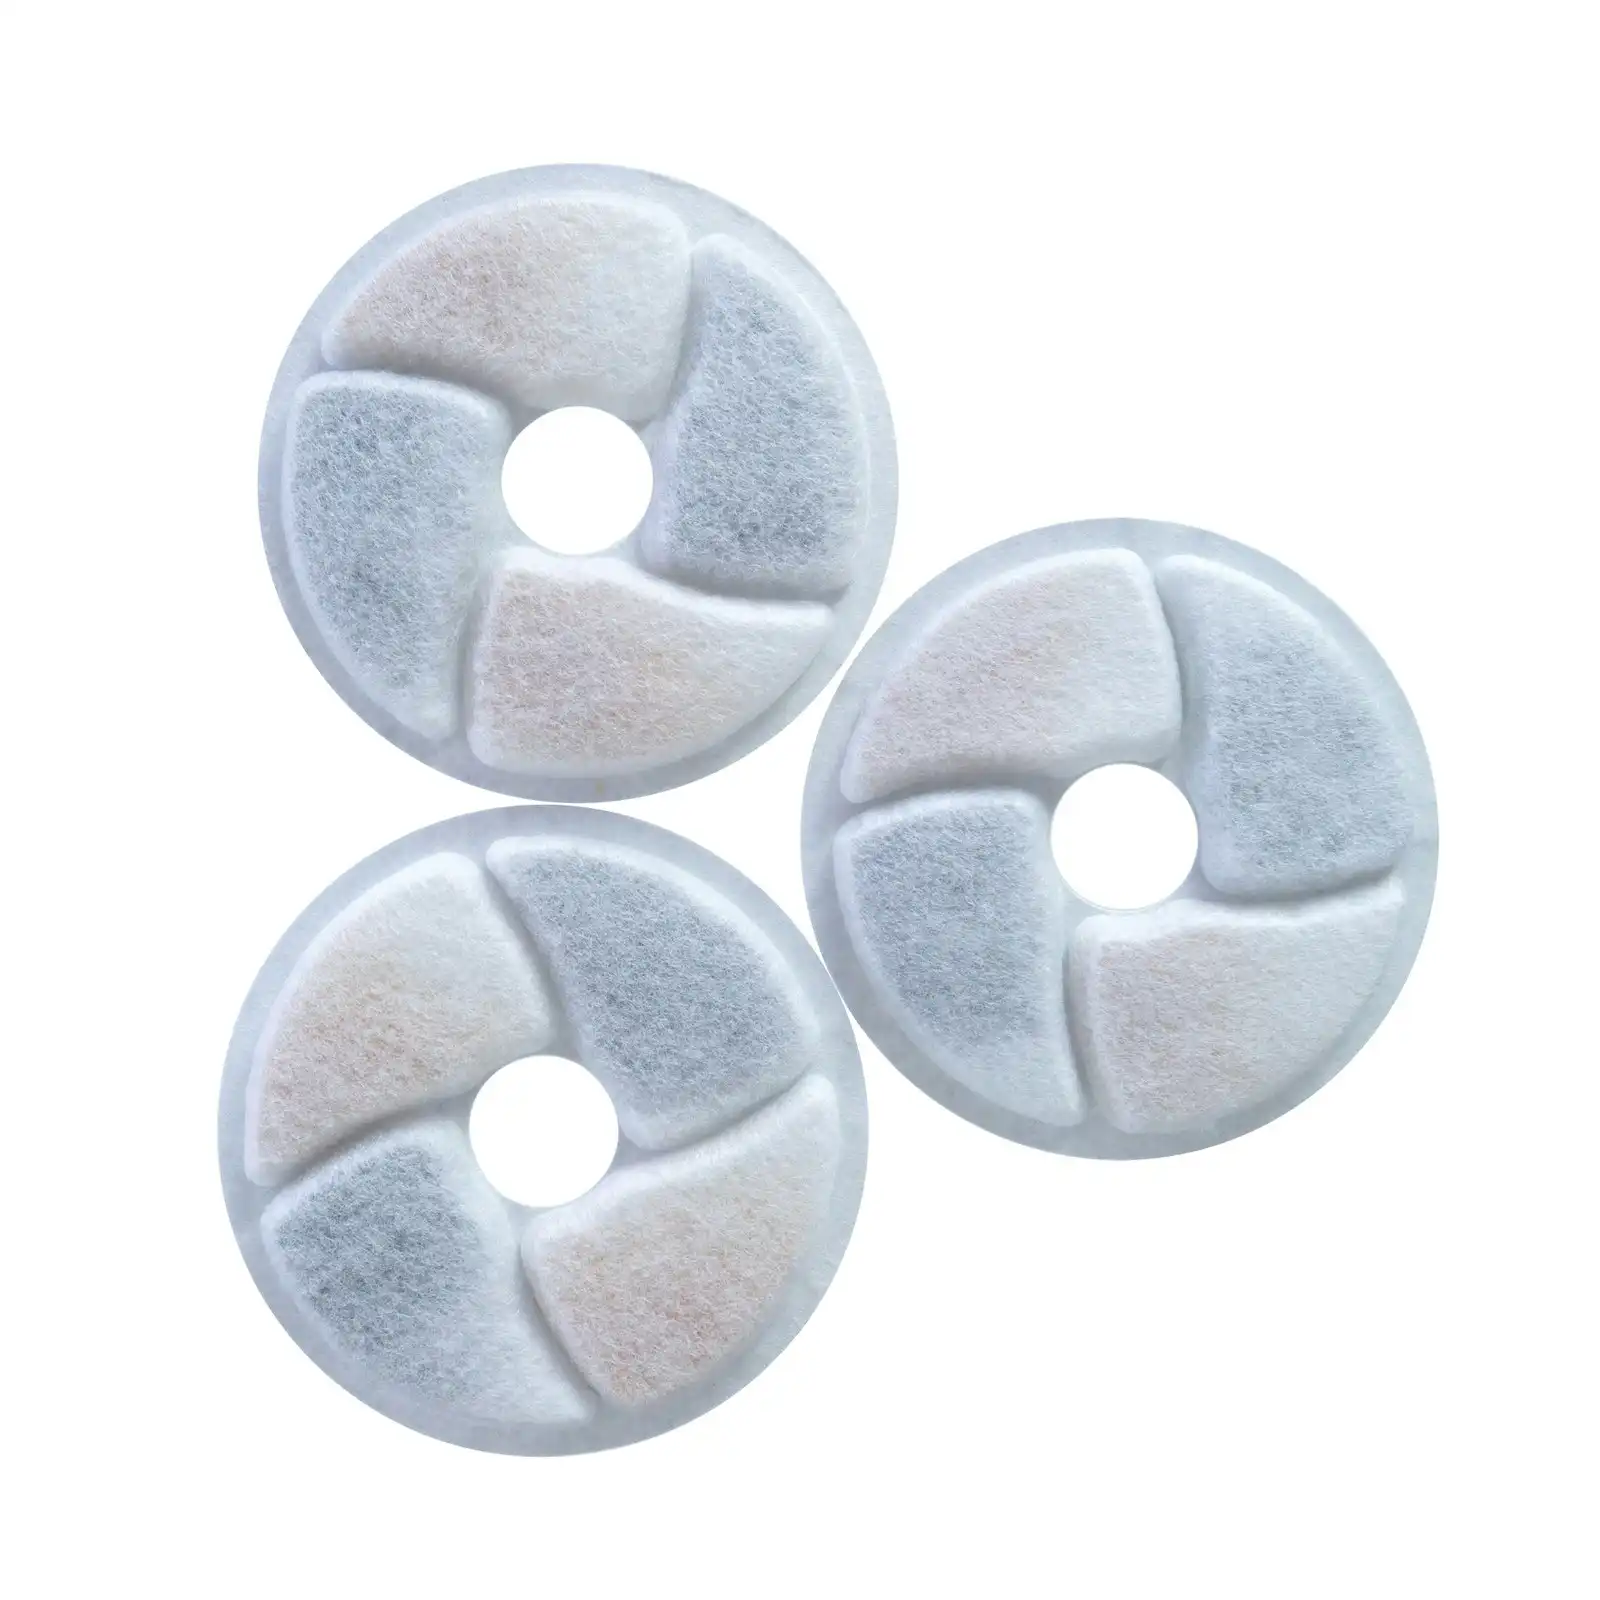 Replacement Filters for Pet Drinking Fountain (3-Pack)